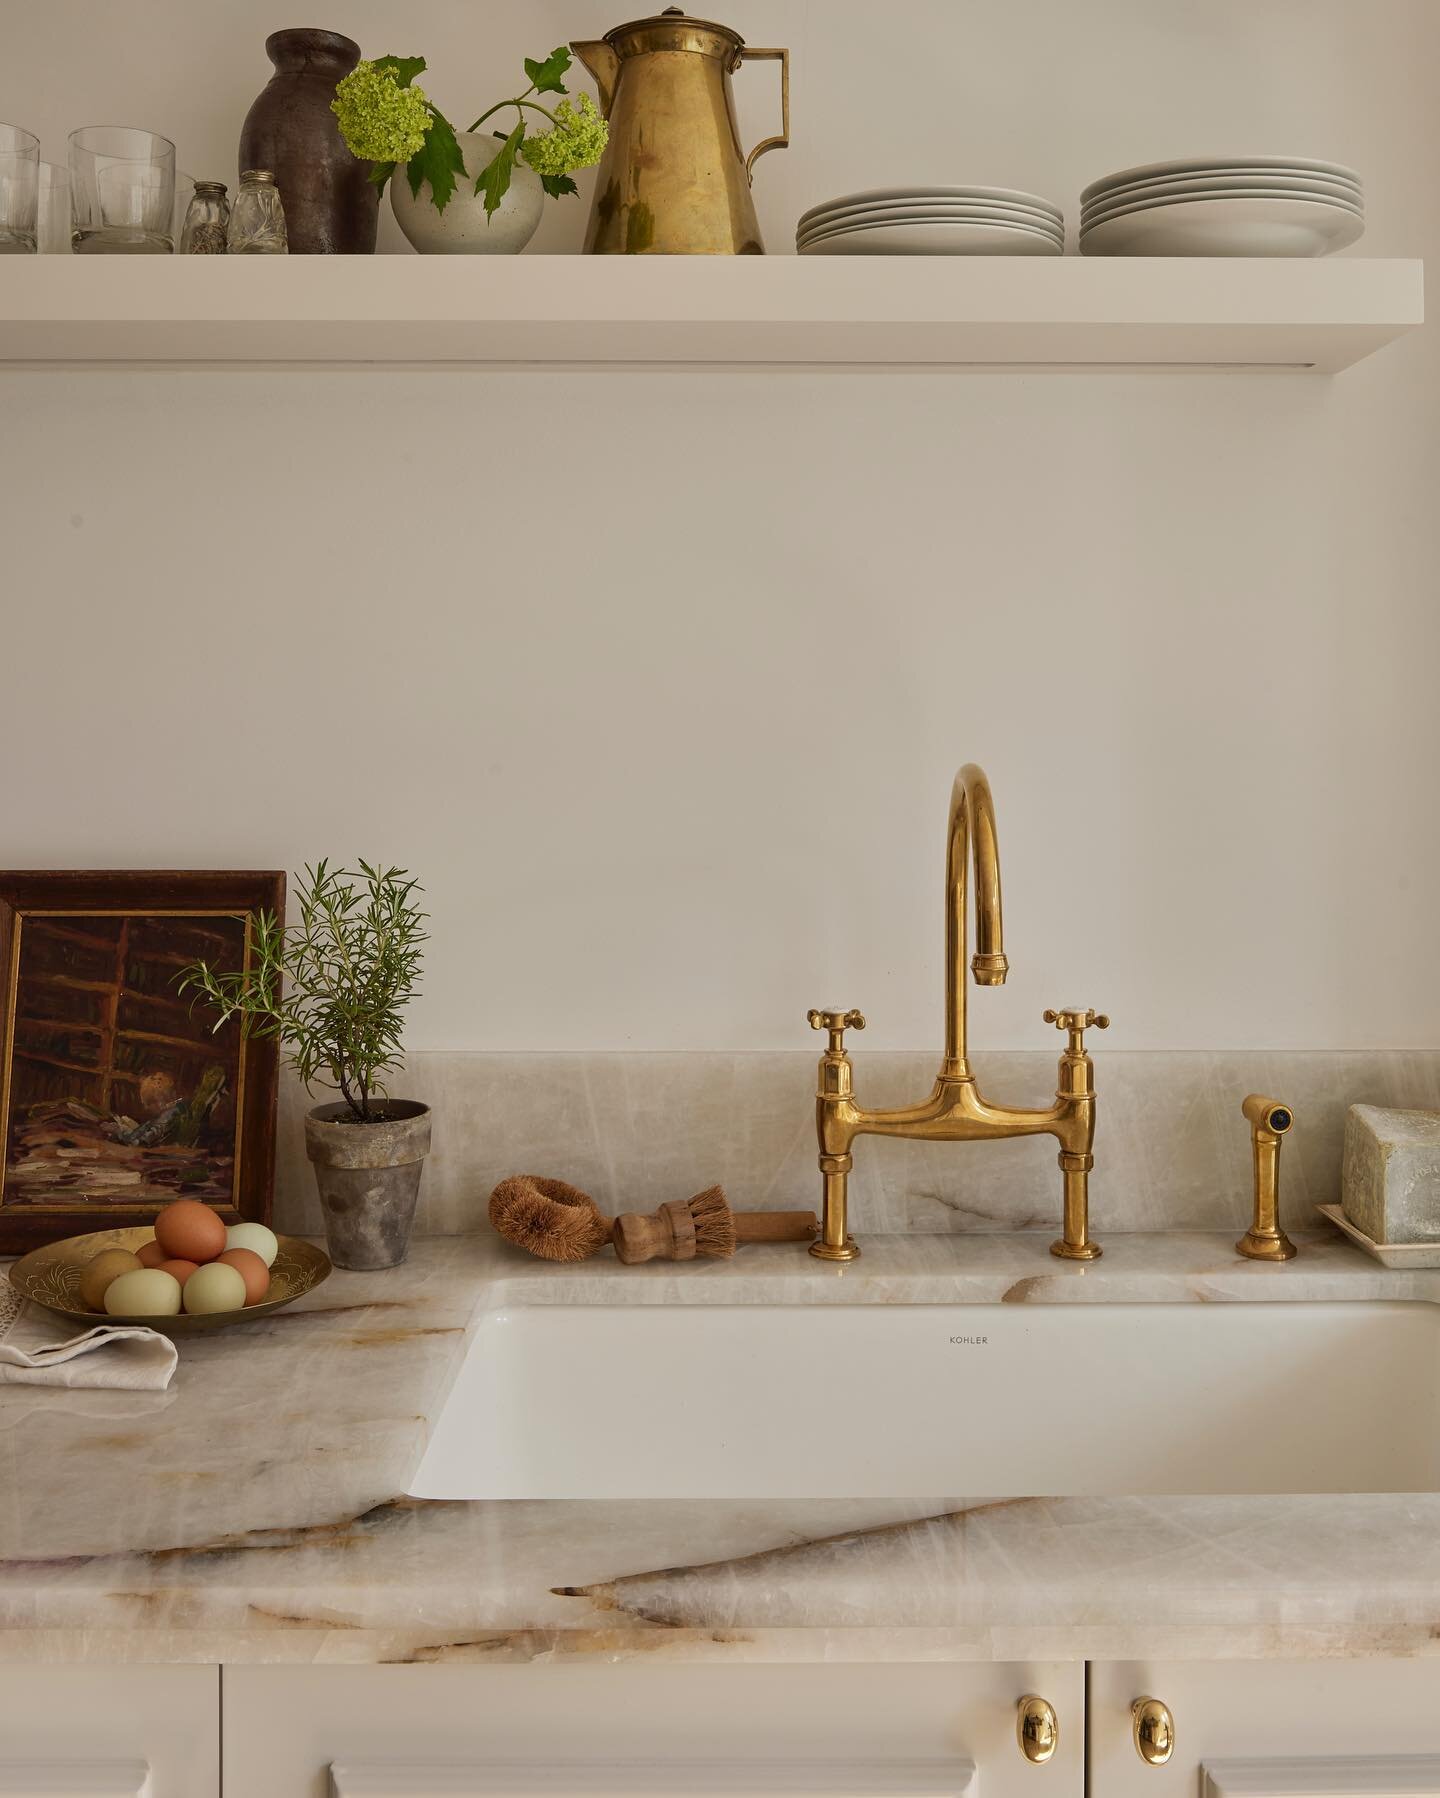 when the counters and faucet speak for themselves 🥰

design @jpzinteriors 
photo @lomillerphoto 
styling @_meandmo_